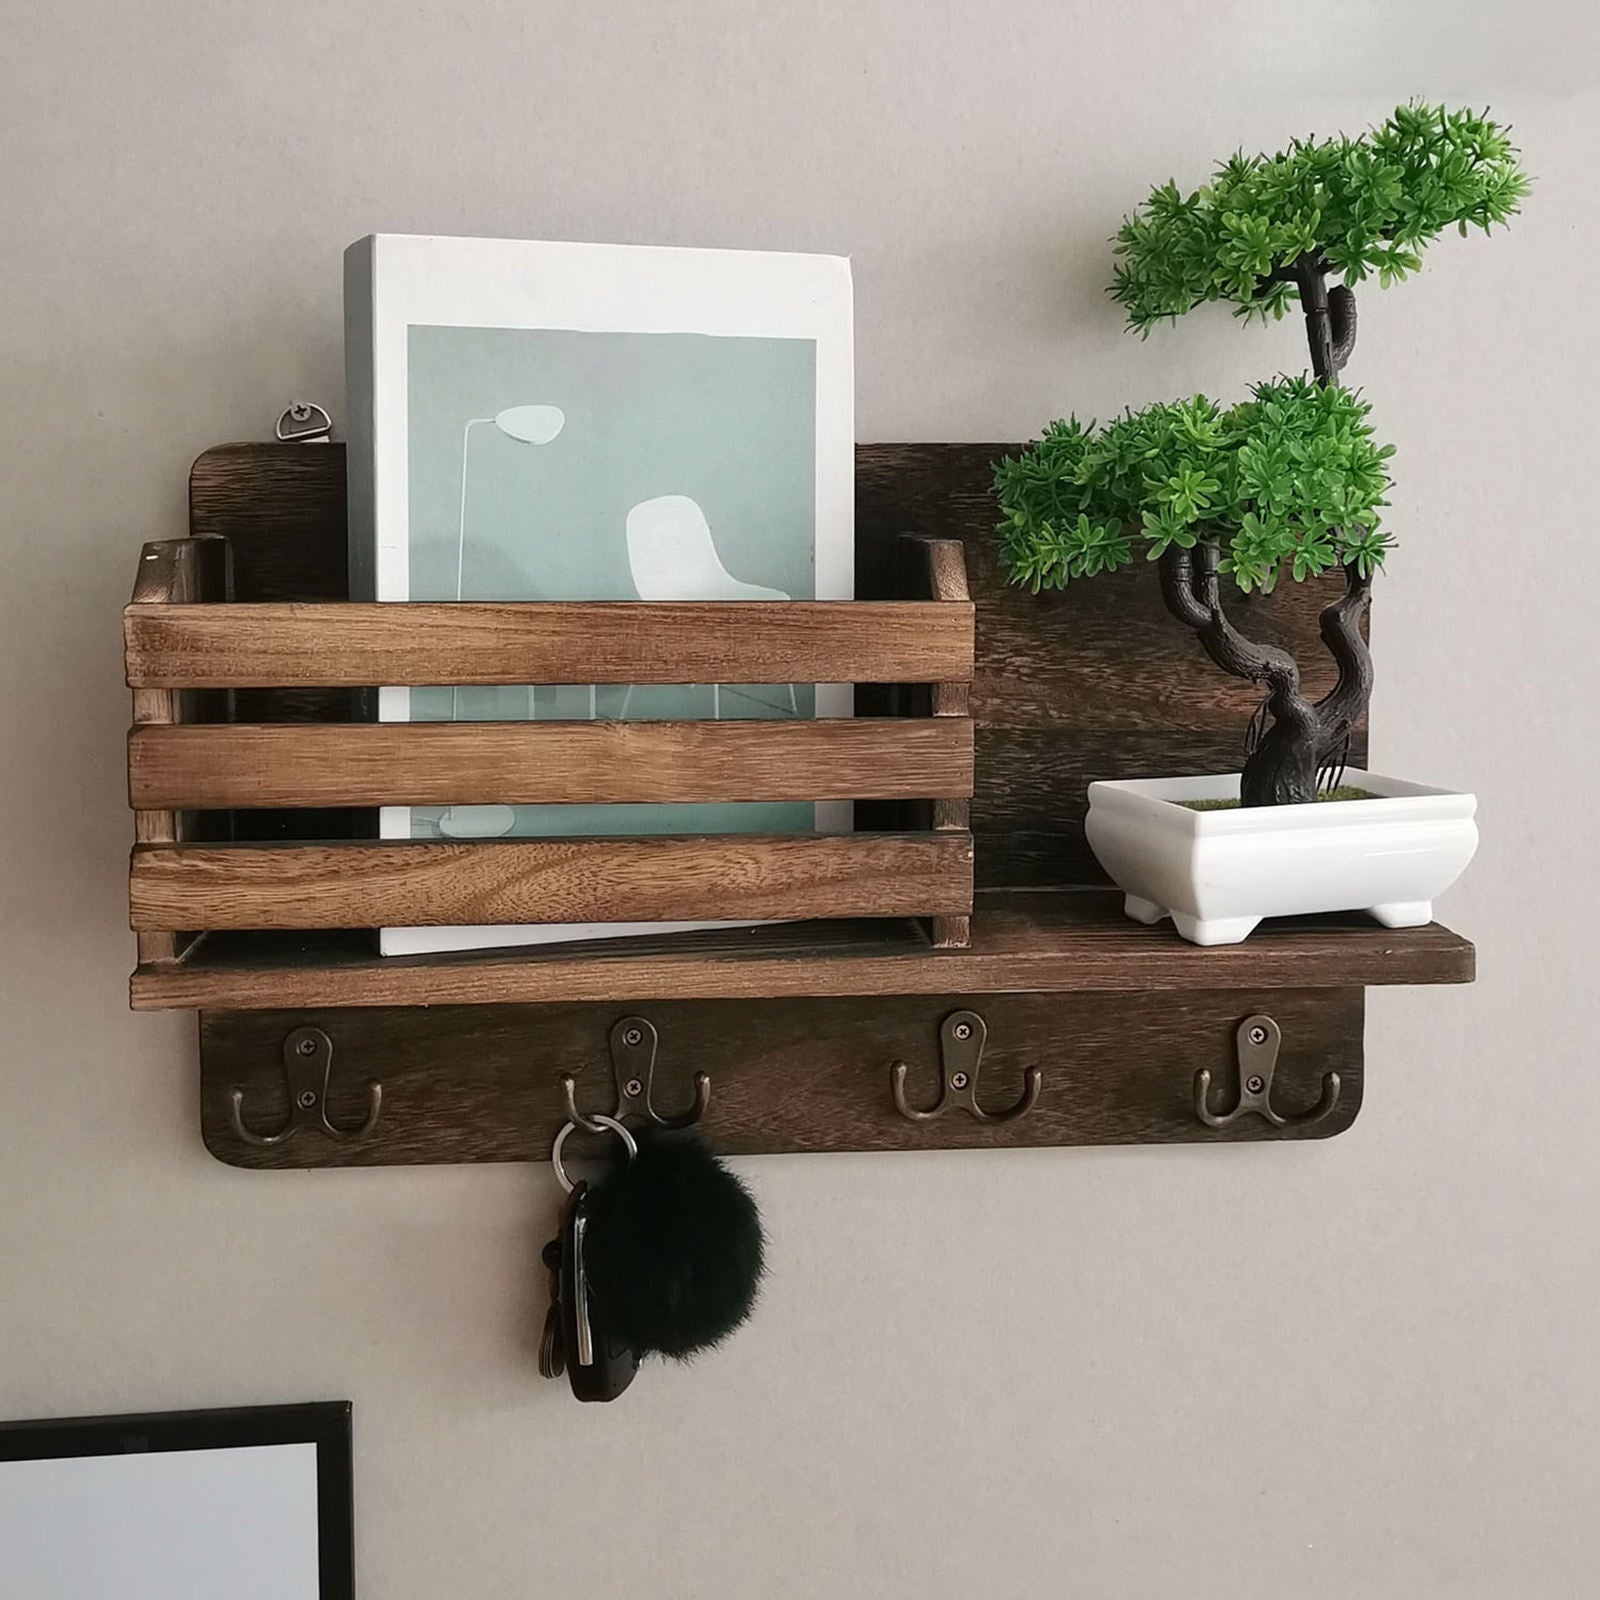 Decorative Wall Mounted Rack Key Rack for Organizer Display Collection